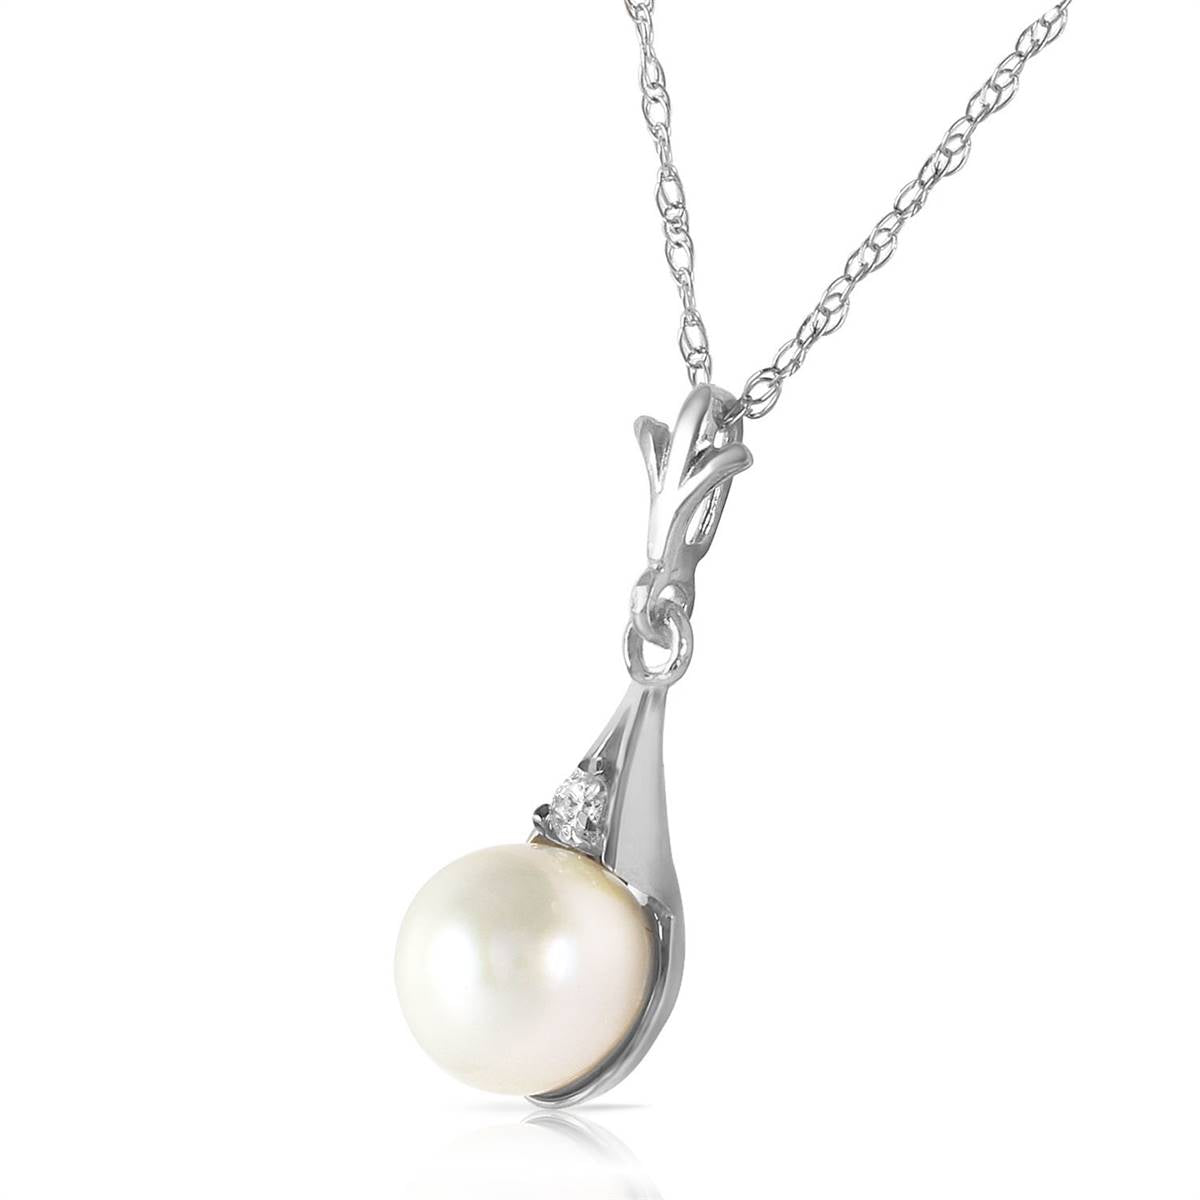 2.03 Carat 14K Solid White Gold Necklace Diamond Pearl